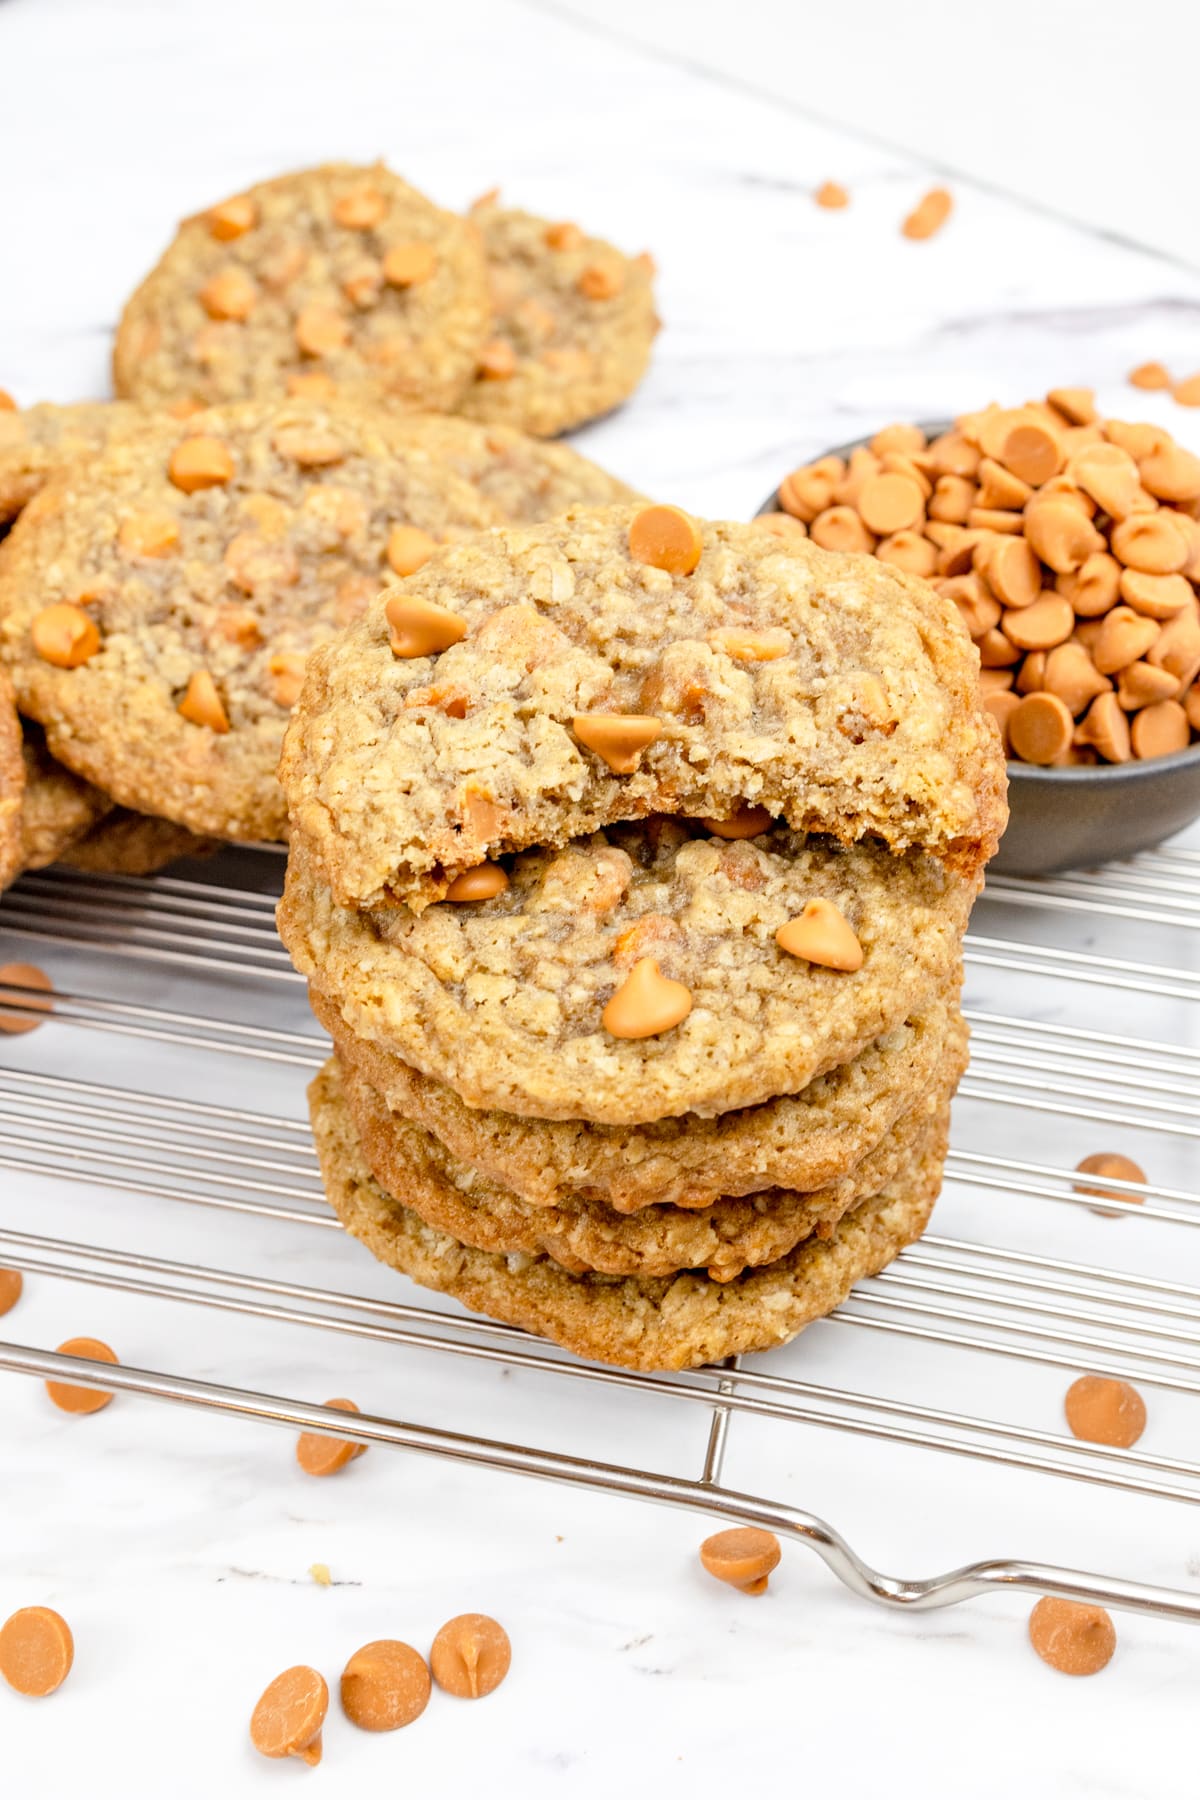 A stack of Oatmeal Butterscotch Cookies, the top one has a bite taken out of it.